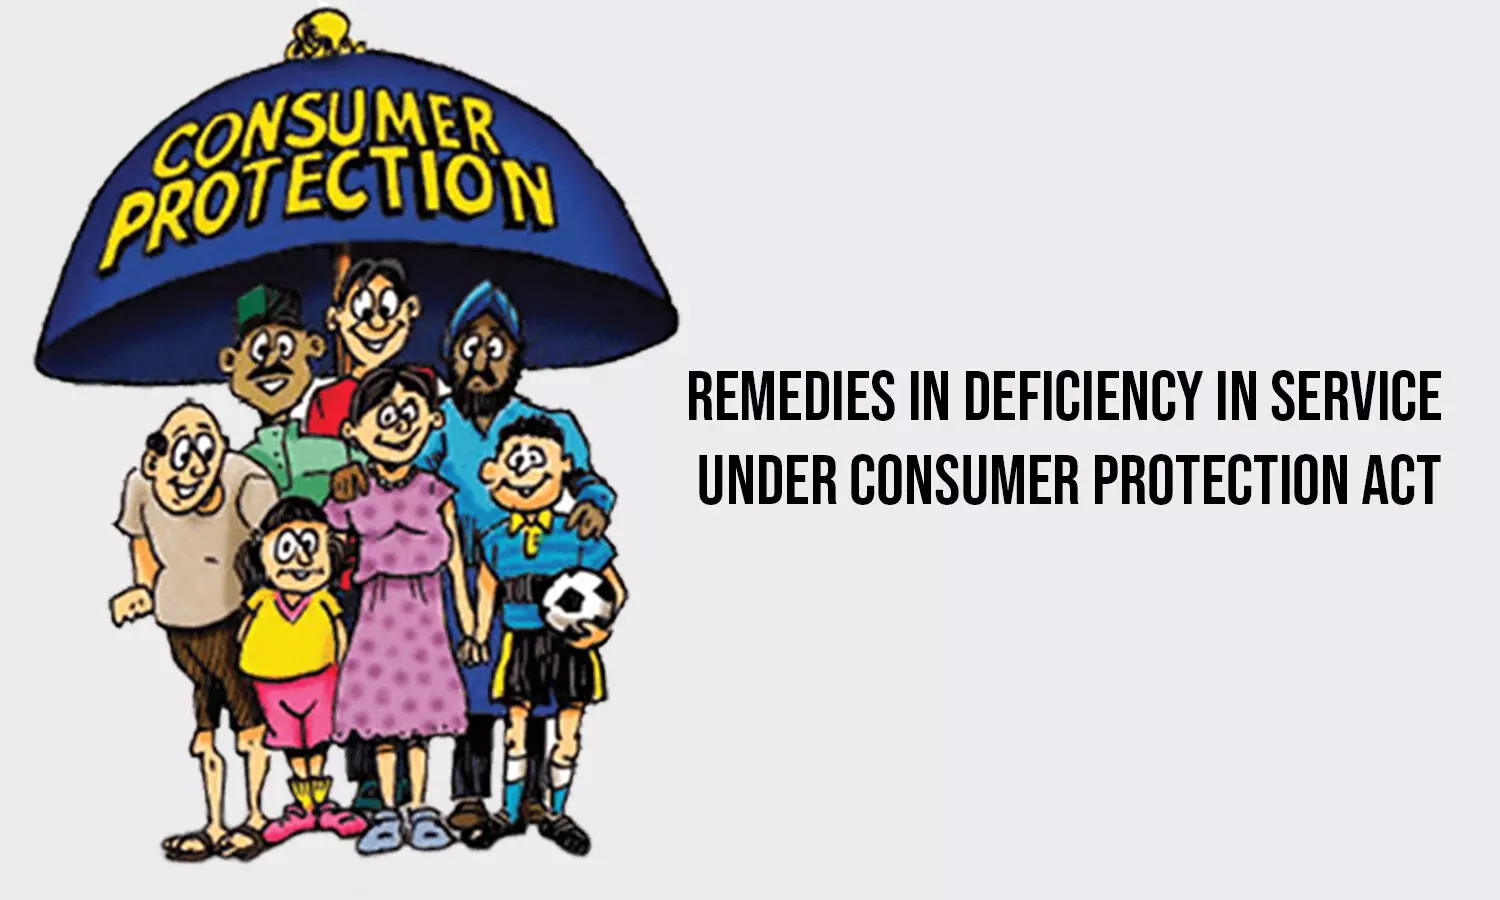 What are the remedies for service deficiency under Consumer Protection Act?